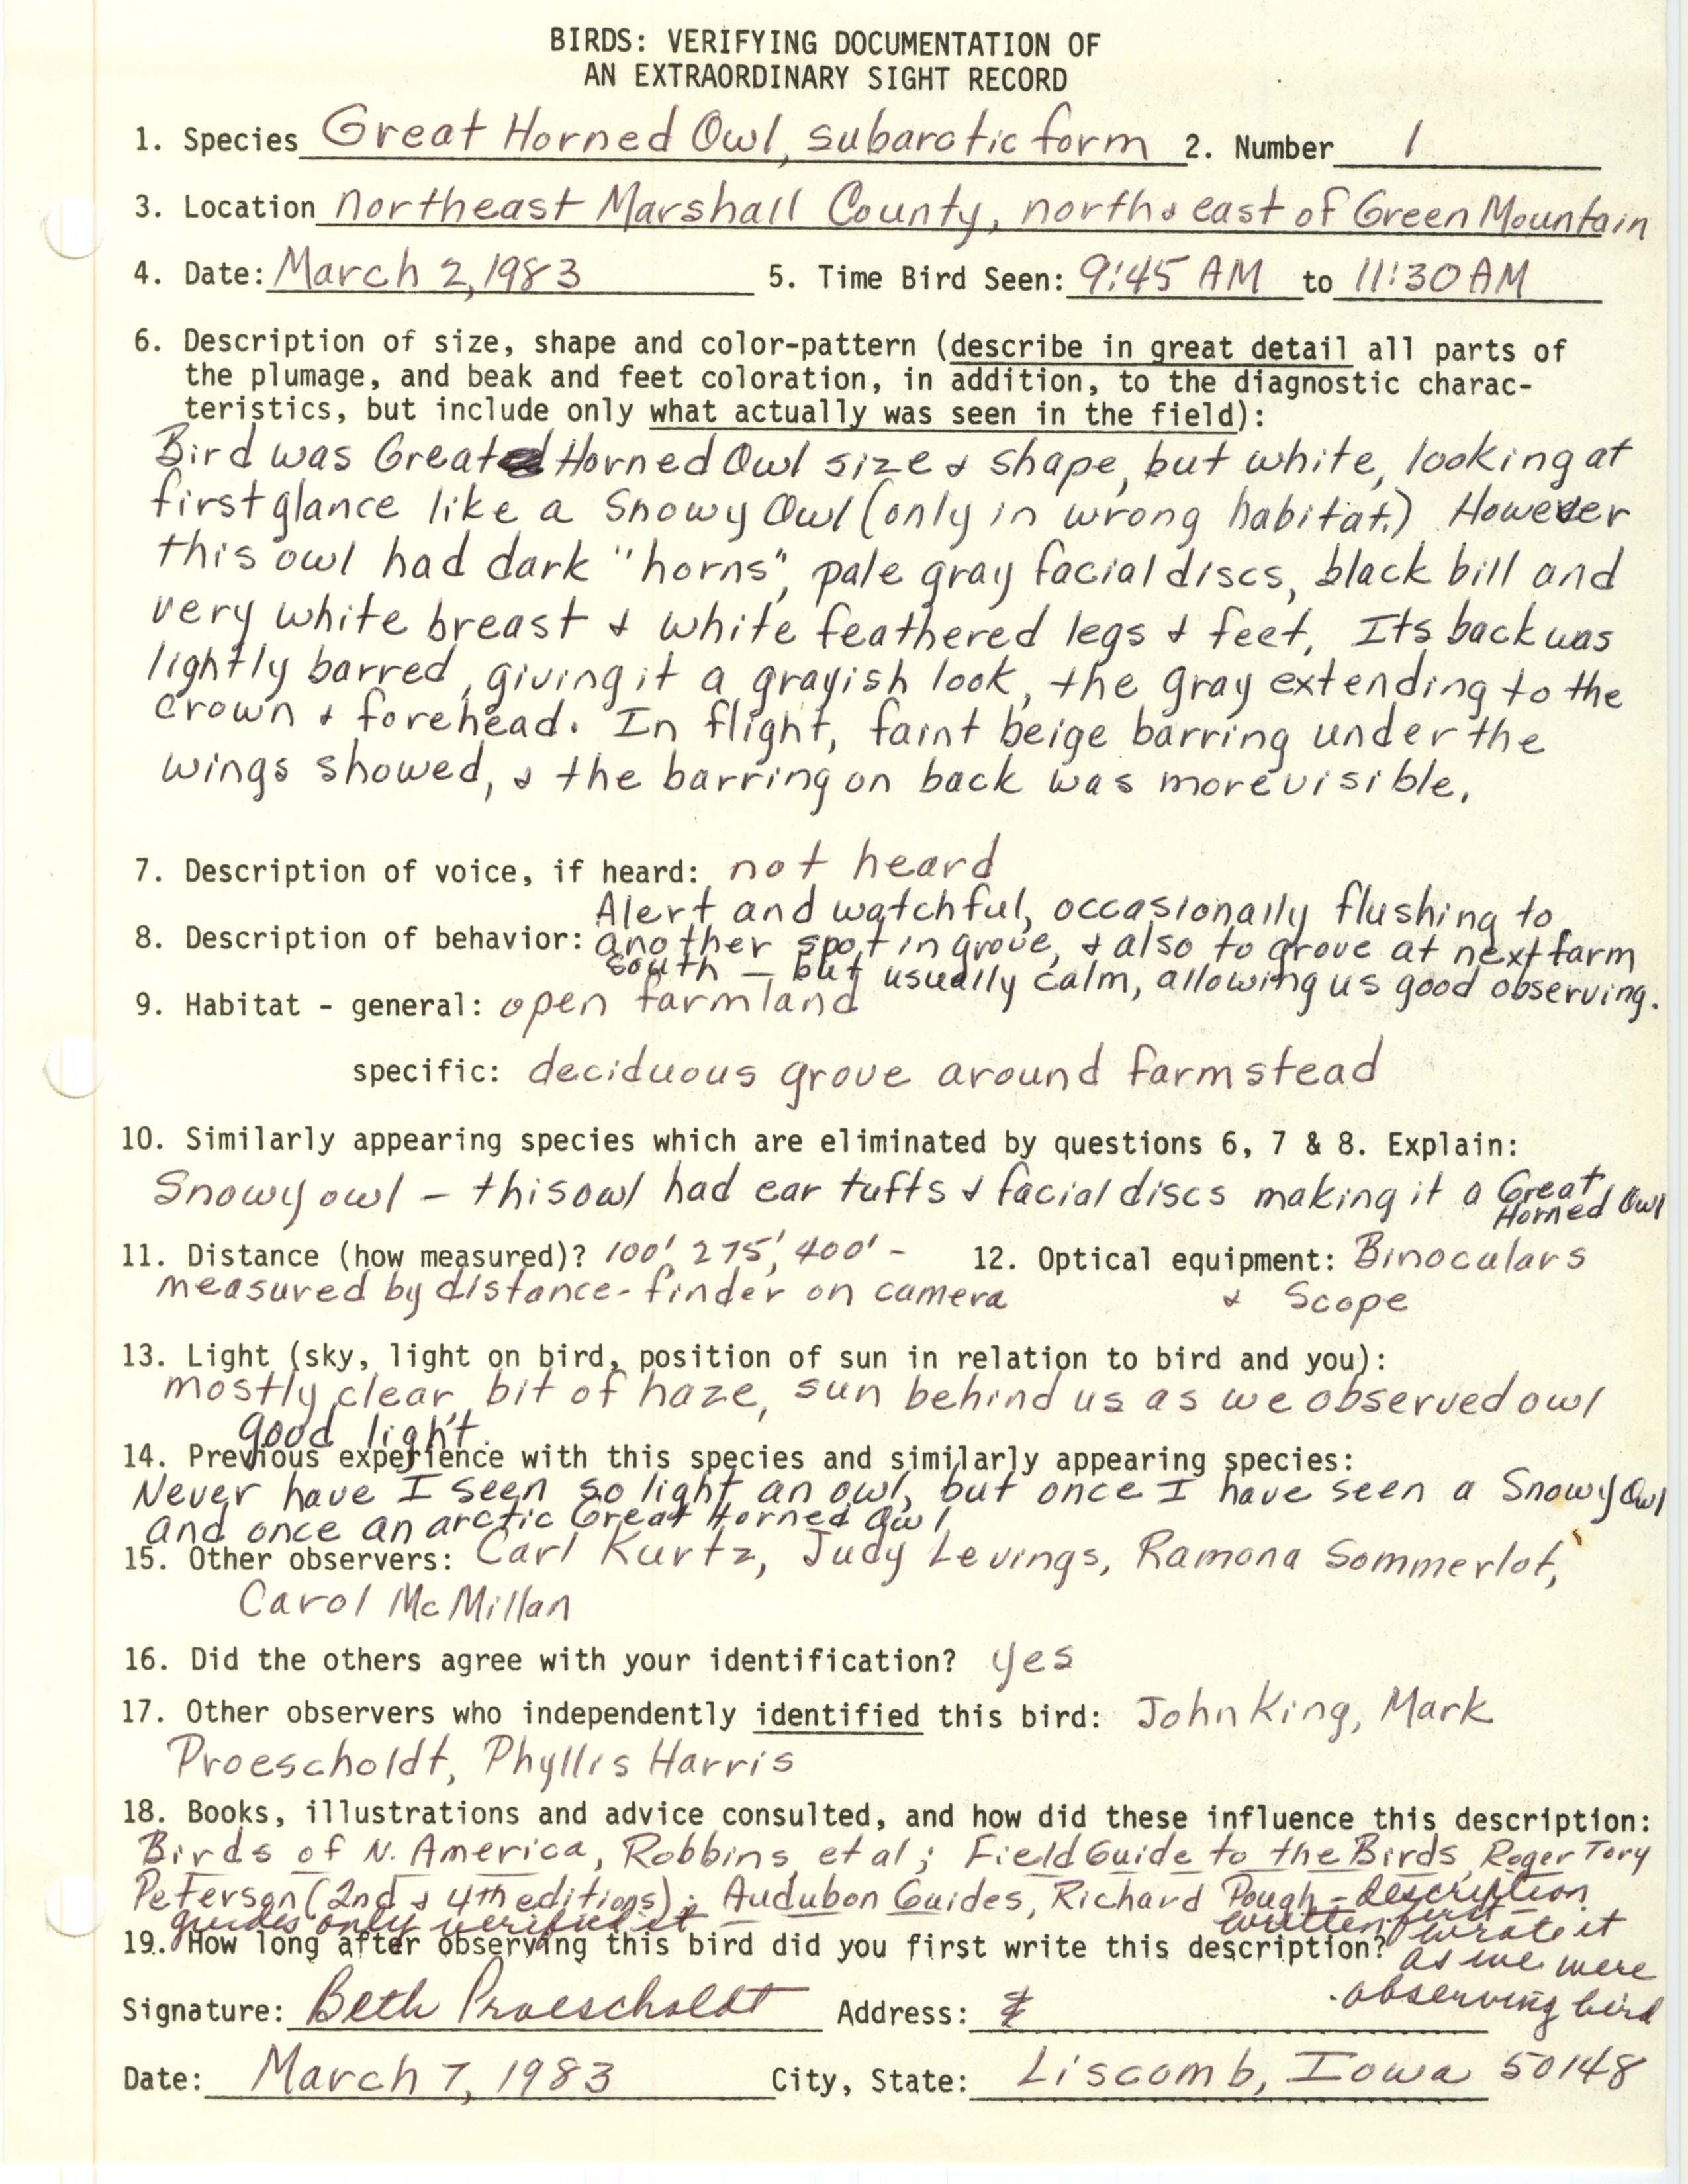 Rare bird documentation form for Great Horned Owl northeast of Green Mountain, 1983